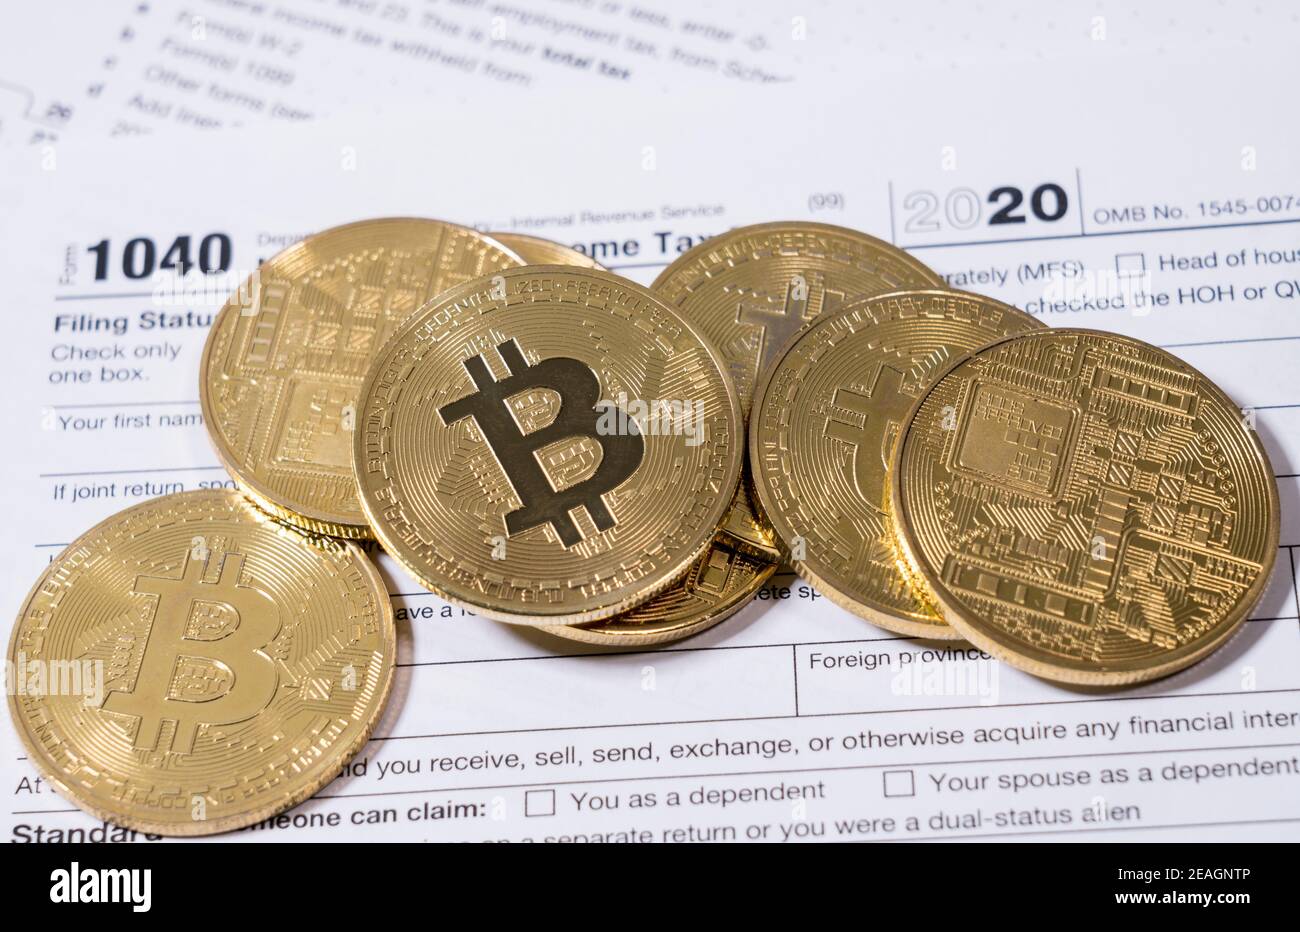 Form 1040 for 2020 with bitcoin coins for reporting of gains from cyber currency trading or investment Stock Photo